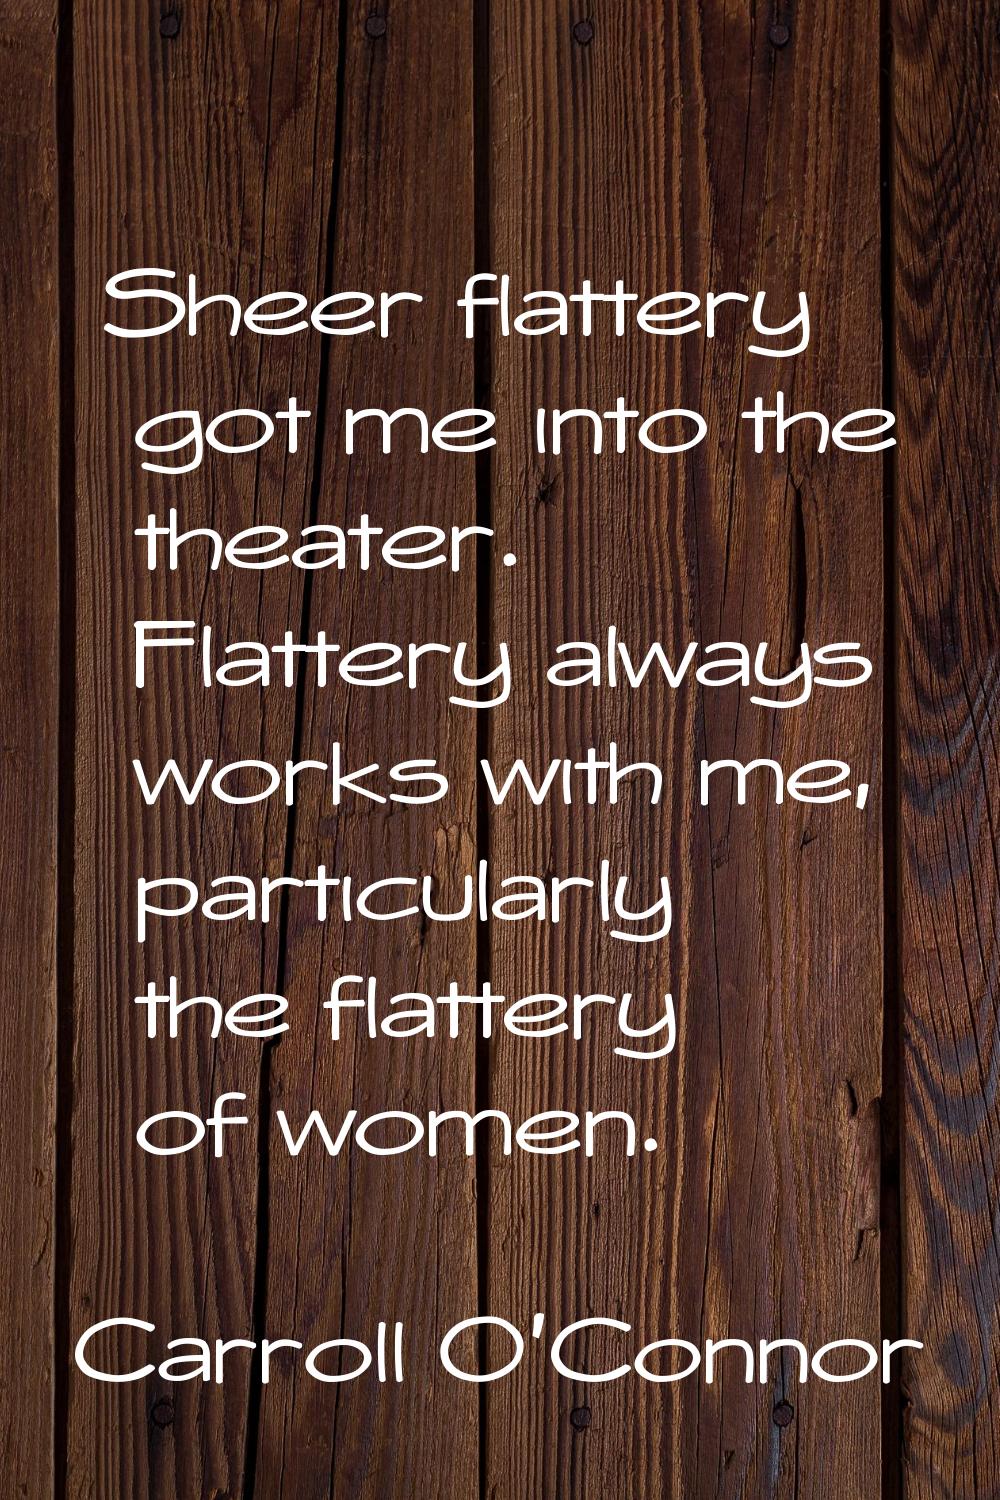 Sheer flattery got me into the theater. Flattery always works with me, particularly the flattery of